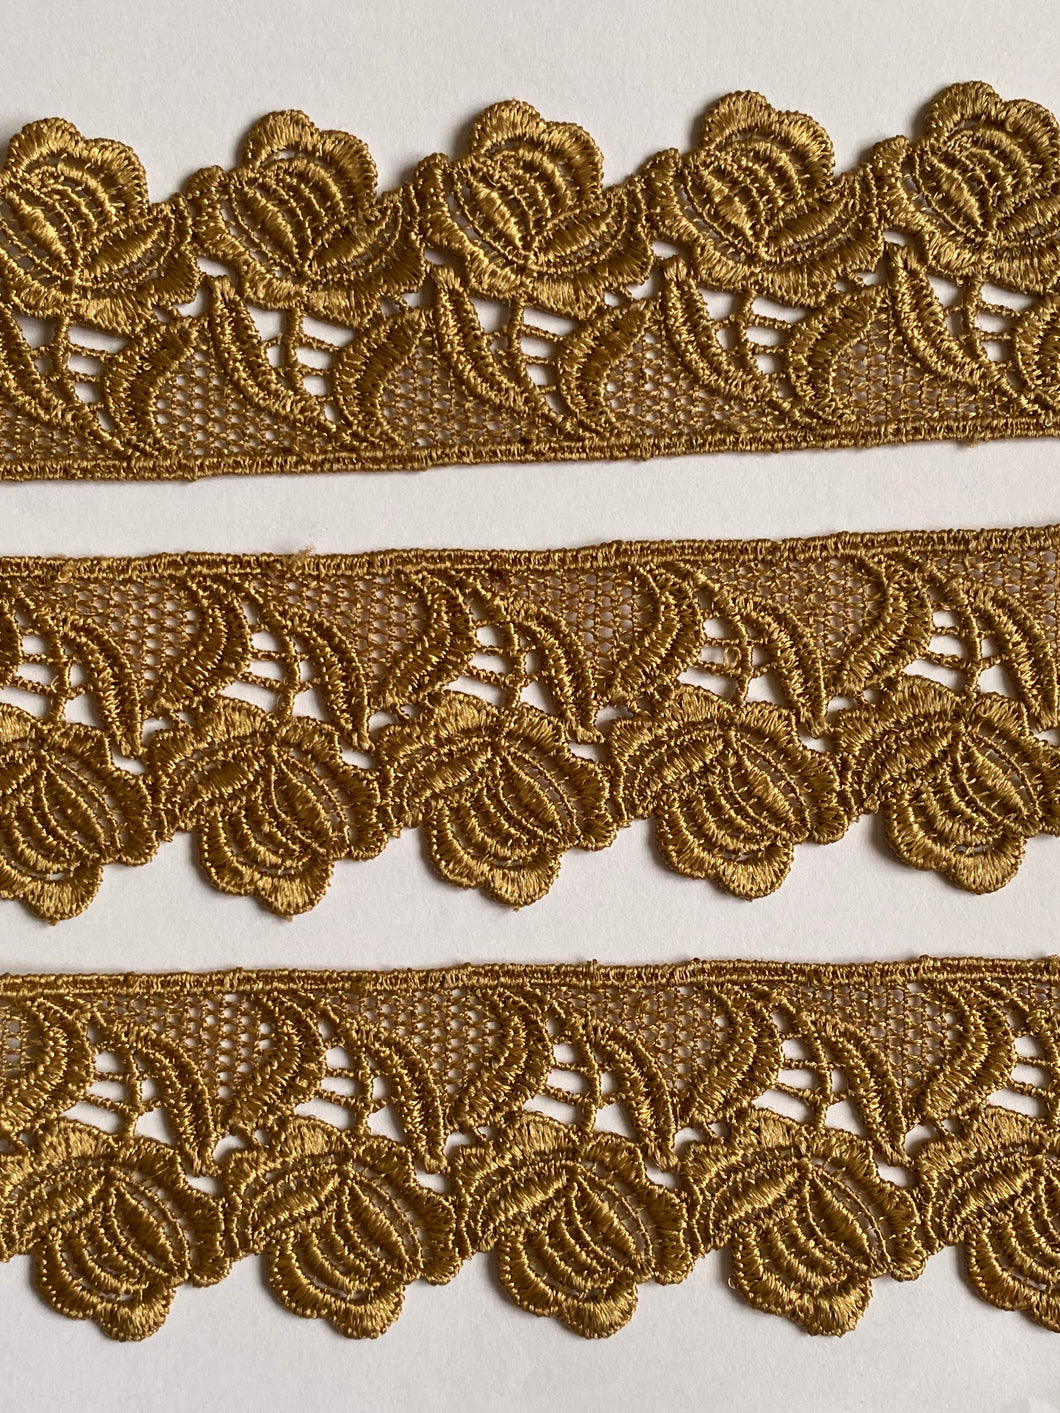 1 yard GOLD Lace Trims 42mm Wide Embroidered Guipure Trimmings Cardmaking Wedding Home Decor Sewing Craft Projects